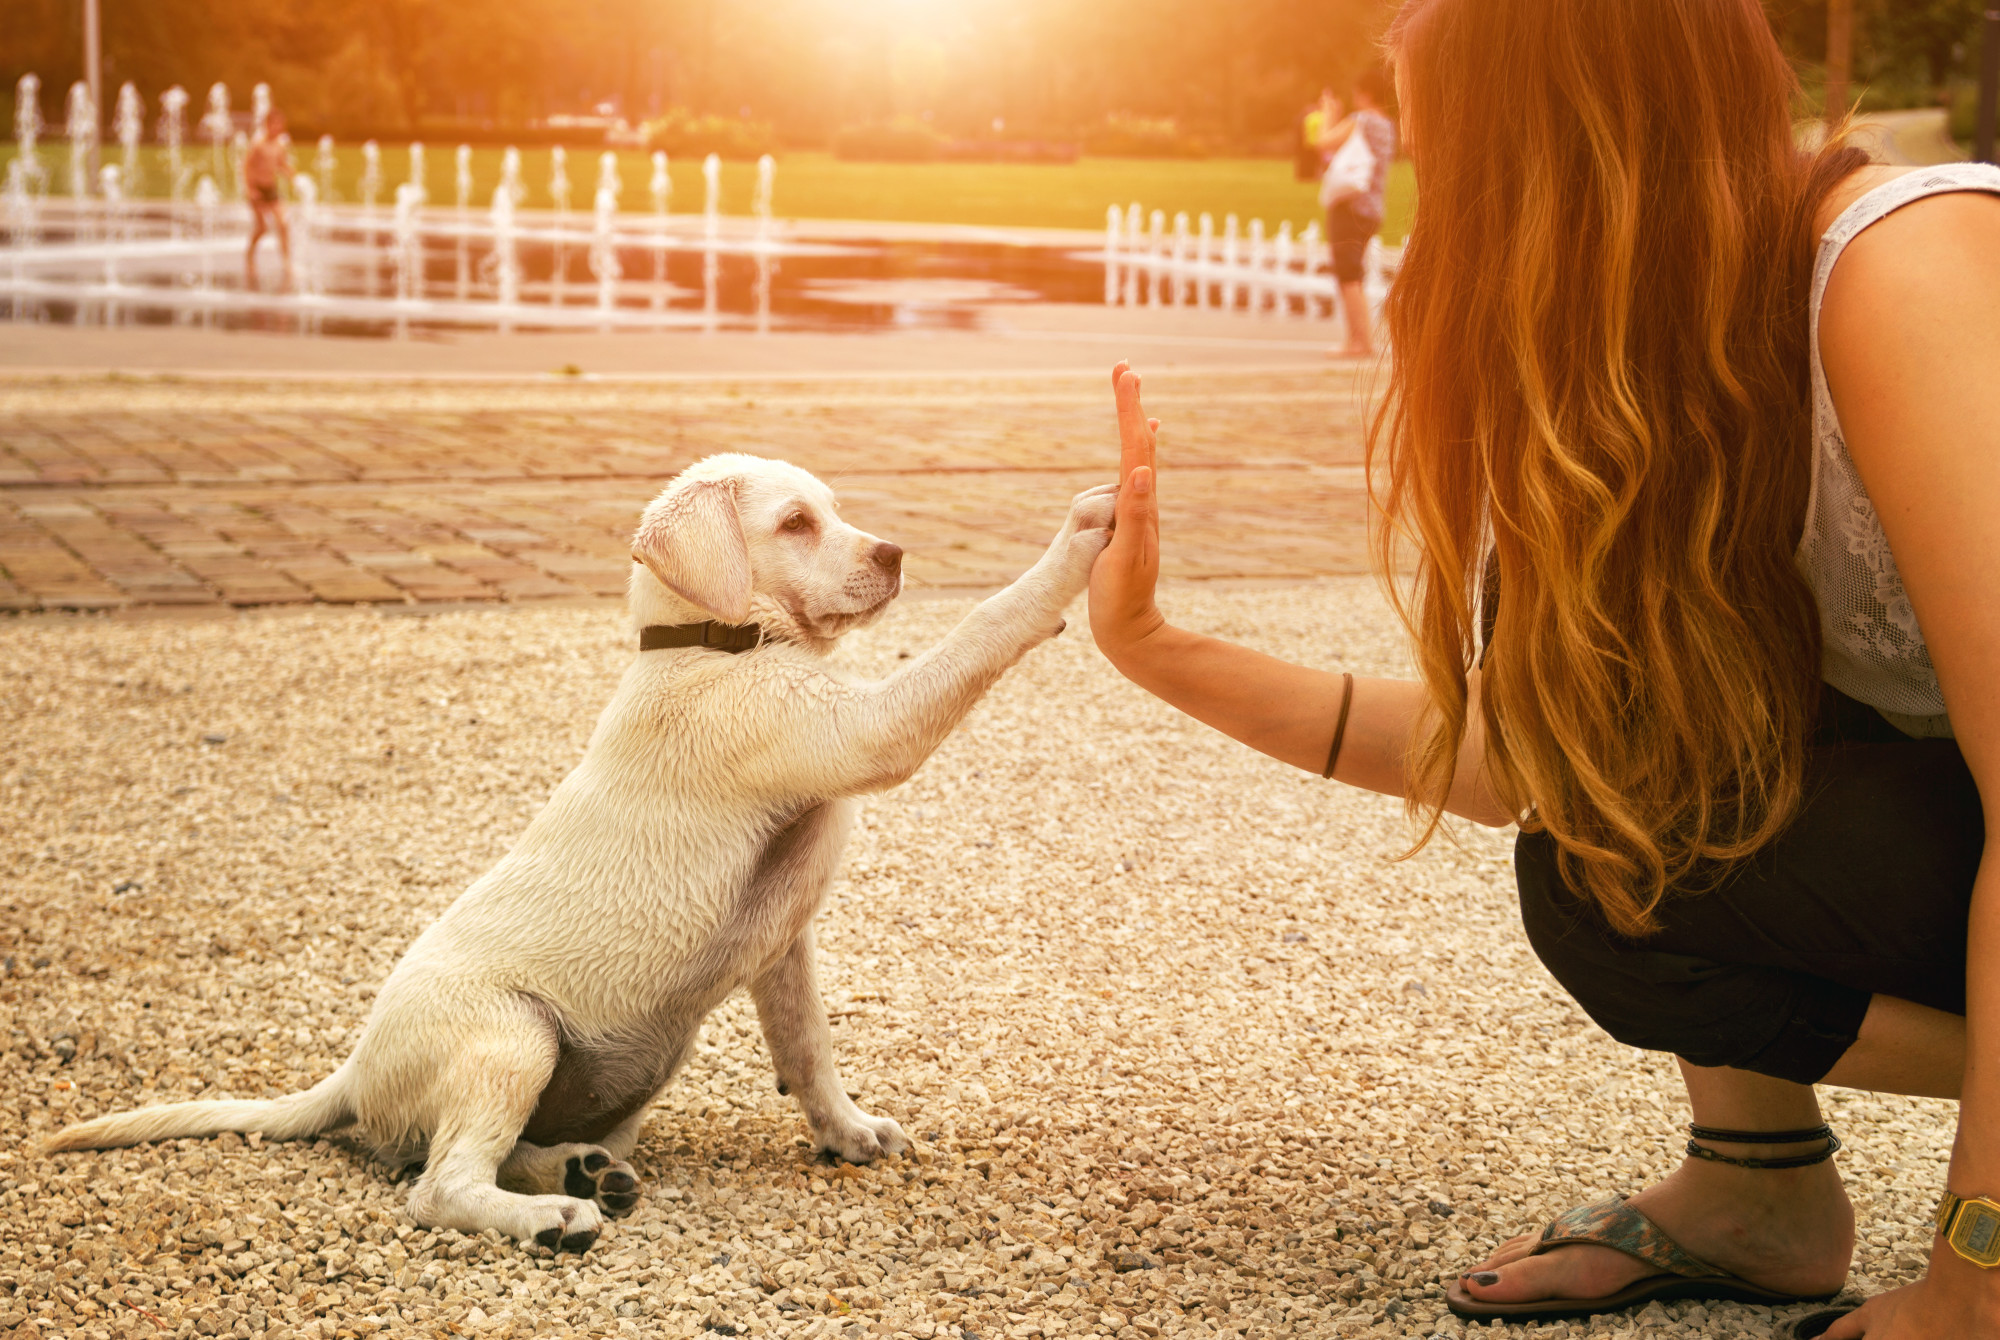 Make sure your puppy gets off to a great start in their new home. Check out our puppy training tips for new dog owners with practical ideas you can use today.